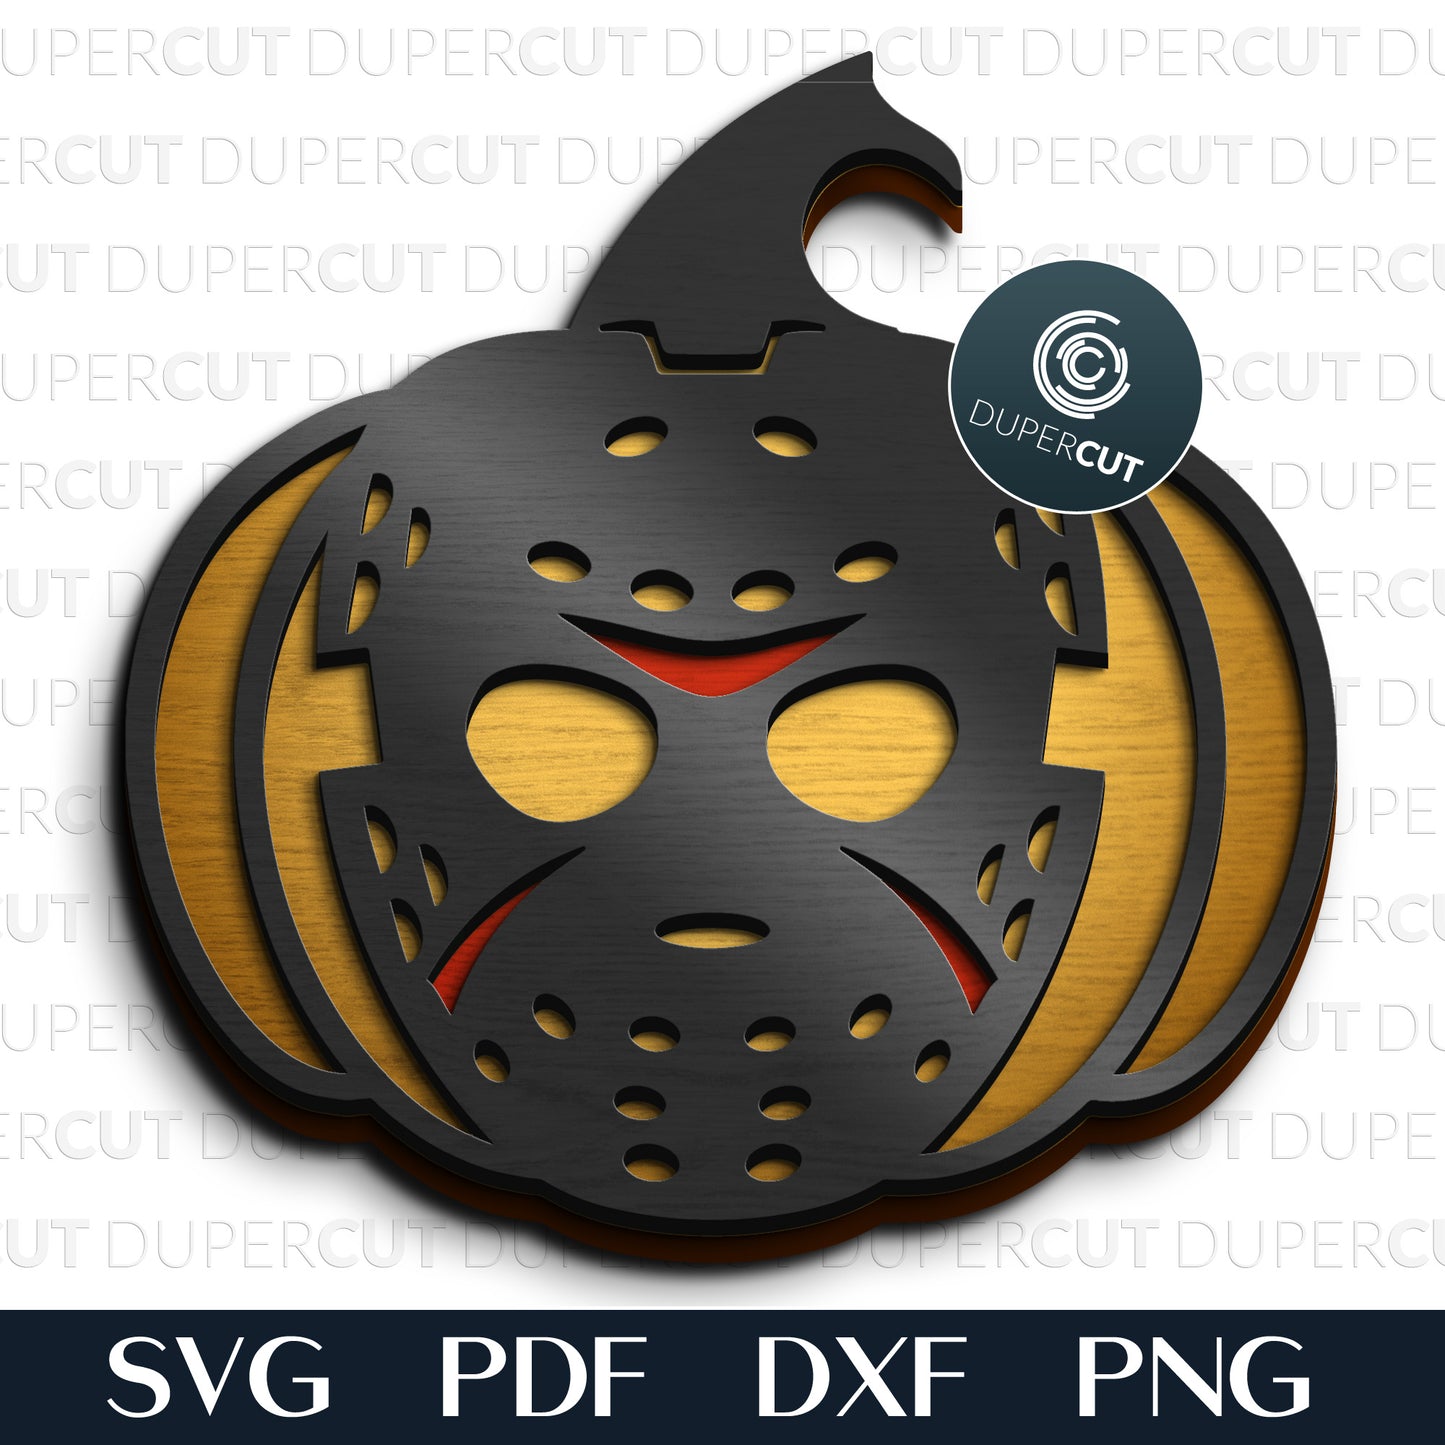 Jason hockey mask abstract pumpkin Halloween decoration - SVG PNG DXF vector laser cutting files for Cricut, Glowforge, Silhouette, CNC plasma machines by DuperCut